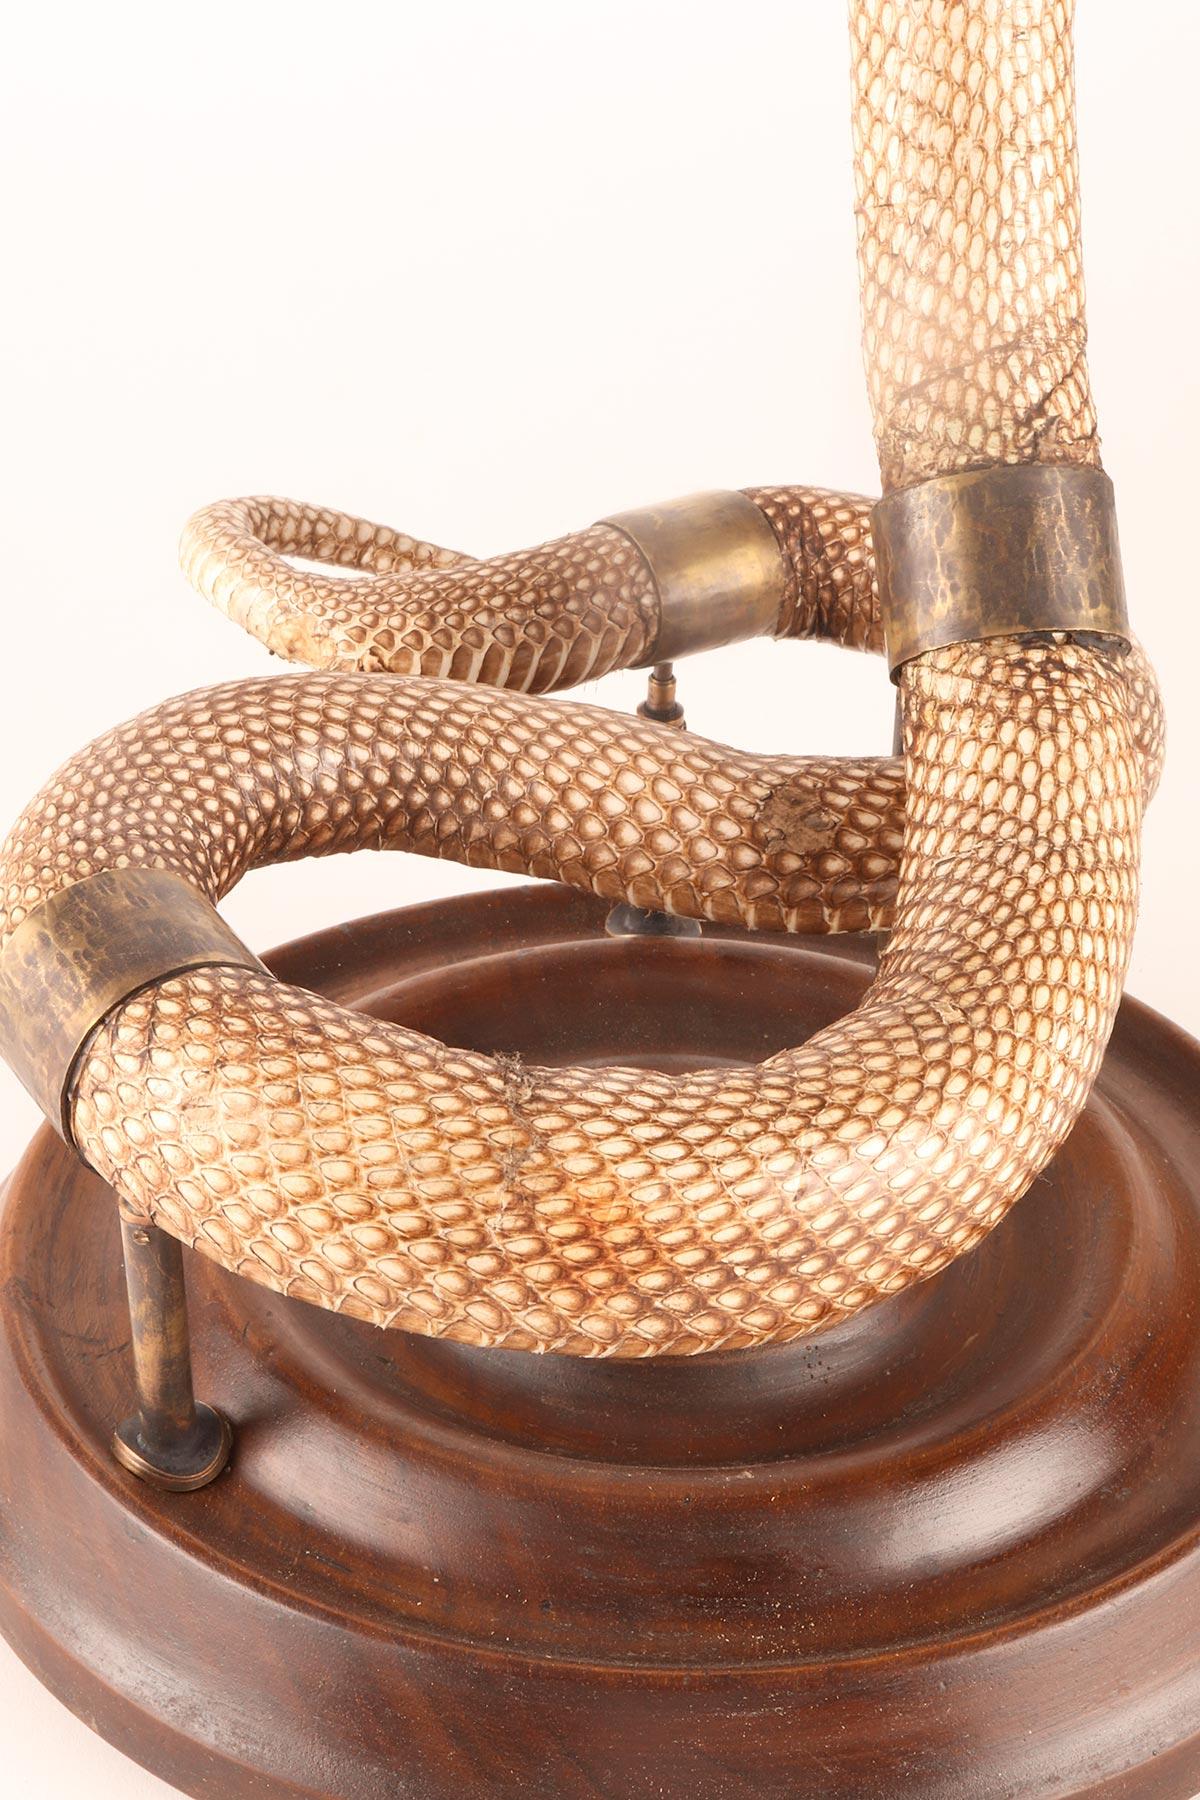 A specimen of Hemachatus hemachatus snake taxidermy, Italy 1890. For Sale 6